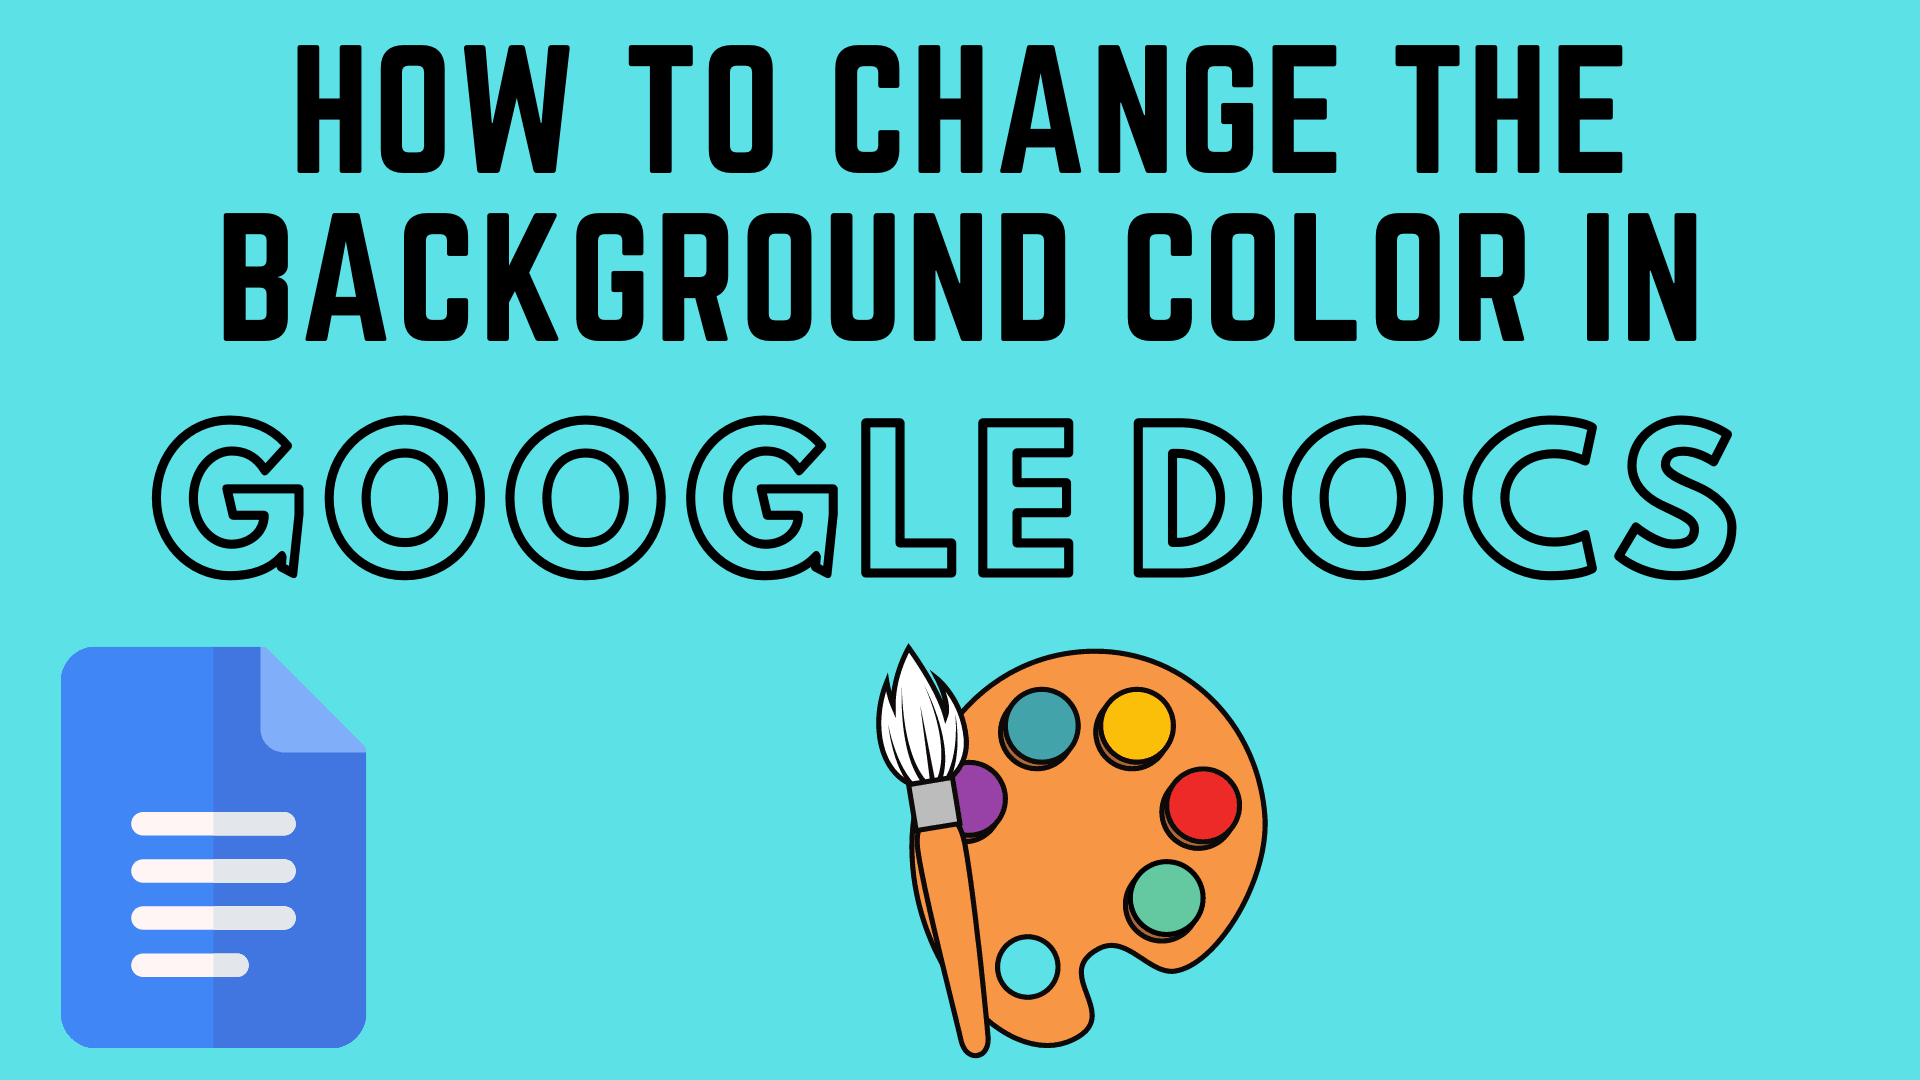 How to Change The Background Color in Google Docs